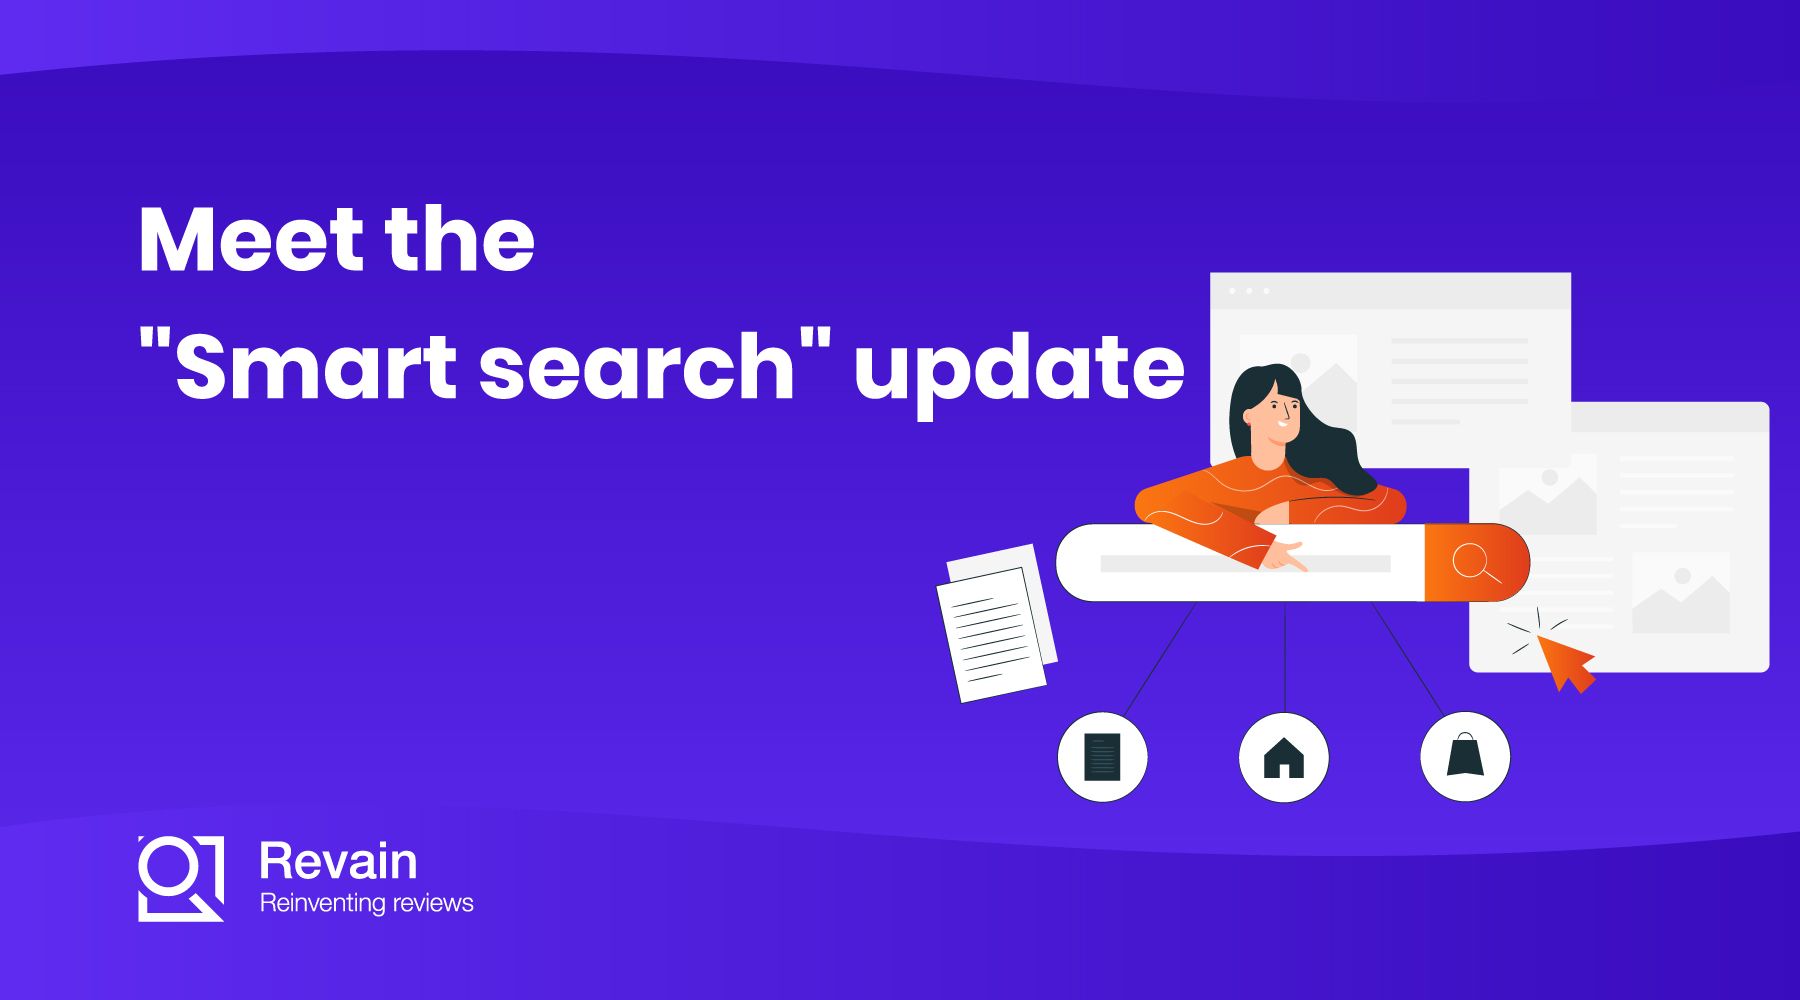 Article We've made "Smart search" even more convenient!